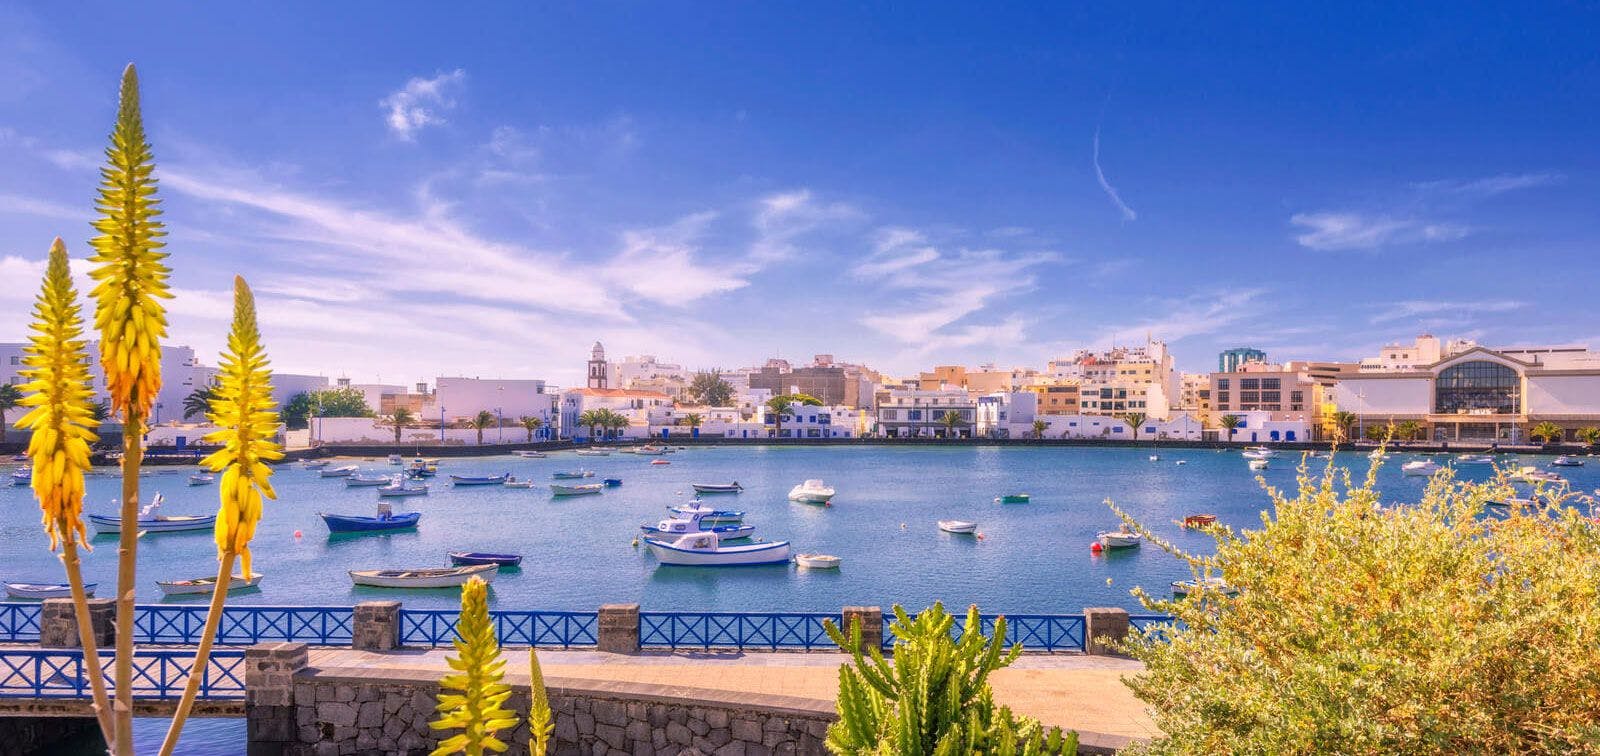 Lanzarote town with harbor and fishing boast in the water